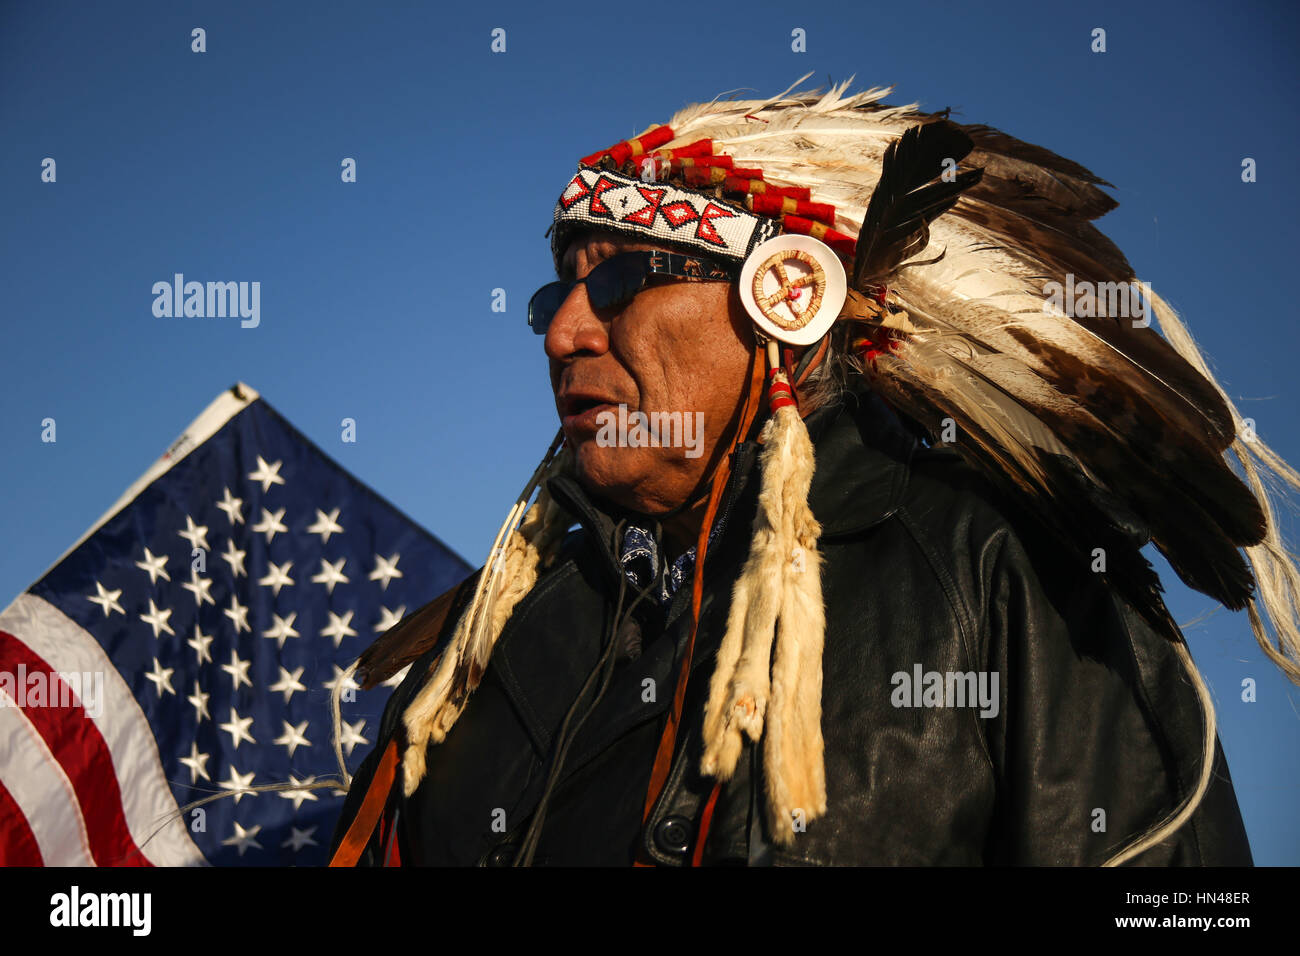 Cannon Ball, North Dakota, USA. 12th Jan, 2017. CHIEF ARVOL LOOKING HORSE speaks to members of the Woodland Cree Tribe at the pipeline protest site located on US Army Corps land in Cannon Ball, North Dakota.Land managed by the Army Corps of Engineers where the pipeline has been routed is disputed by protestors to be land of the Standing Rock Sioux Tribe as a result of the 1851 Treaty of Fort Laramie. The treaty established Native American territories and interaction between the tribe and the United States, but was not respected by non-Indians. The treaty council met again to resolve some Stock Photo